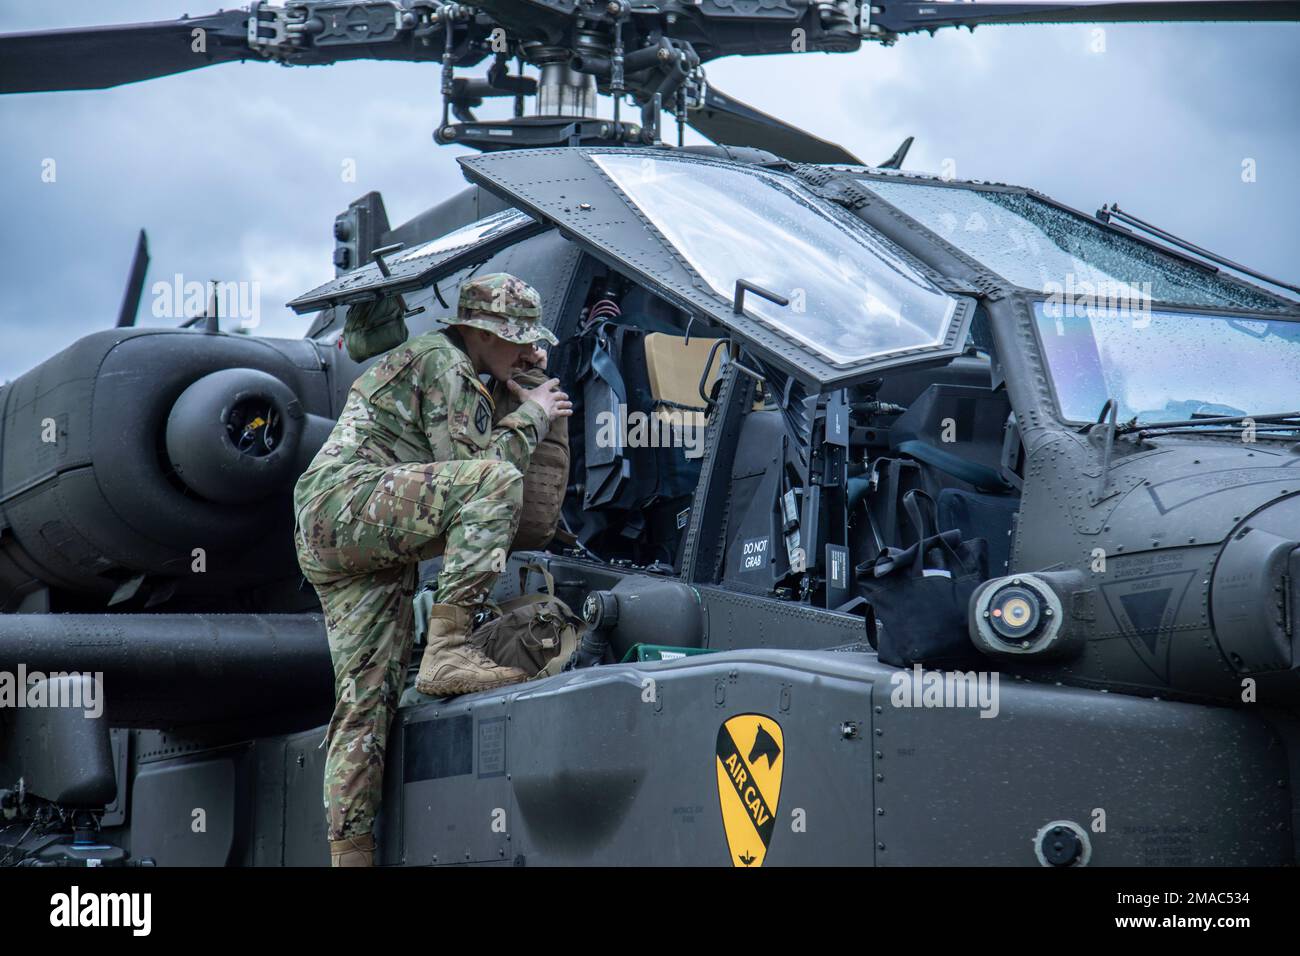 Cheif Warrant Officer 2 Starkey of Bravo Troop, 7th Squadron, 17th Cavalry Regiment conducts pre-flight inspections on an AH-64 Apache helicopter during Combined Resolve XVII, Hohenfels Training Area, May 25, 2022. Combined Resolve XVII is a United States Army Europe and Africa directed, 7th Army Training Command executed training event at the Joint Multinational Readiness Center to exercise combined arms operations in a multinational environment.  The exercise features approximately 4,800 Soldiers from Belgium, Bosnia & Herzegovina, Czech Republic, Estonia, Greece, Italy, Kosovo, Lithuania, M Stock Photo